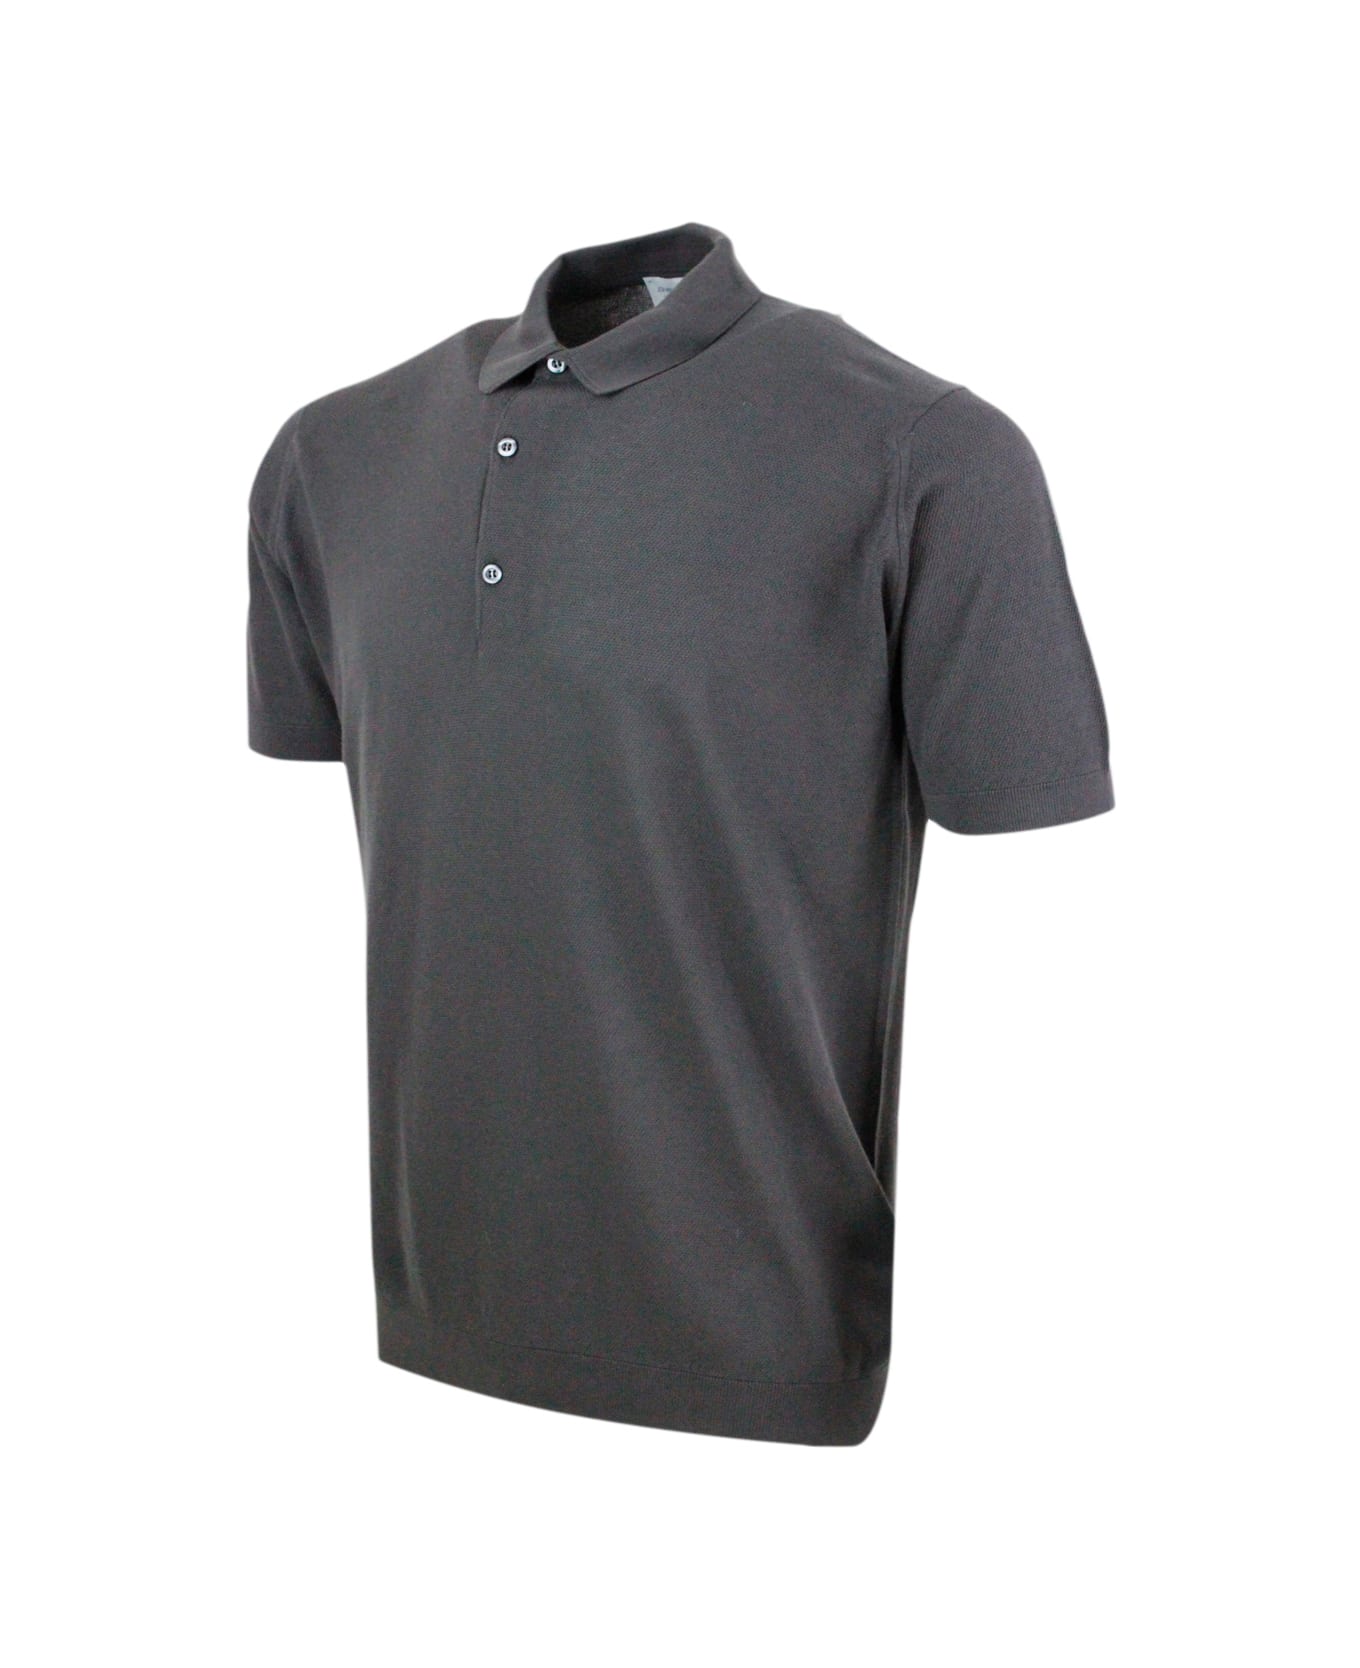 John Smedley Short-sleeved Polo Shirt In Extrafine Piqué Cotton Thread With Three Buttons - Chocolate